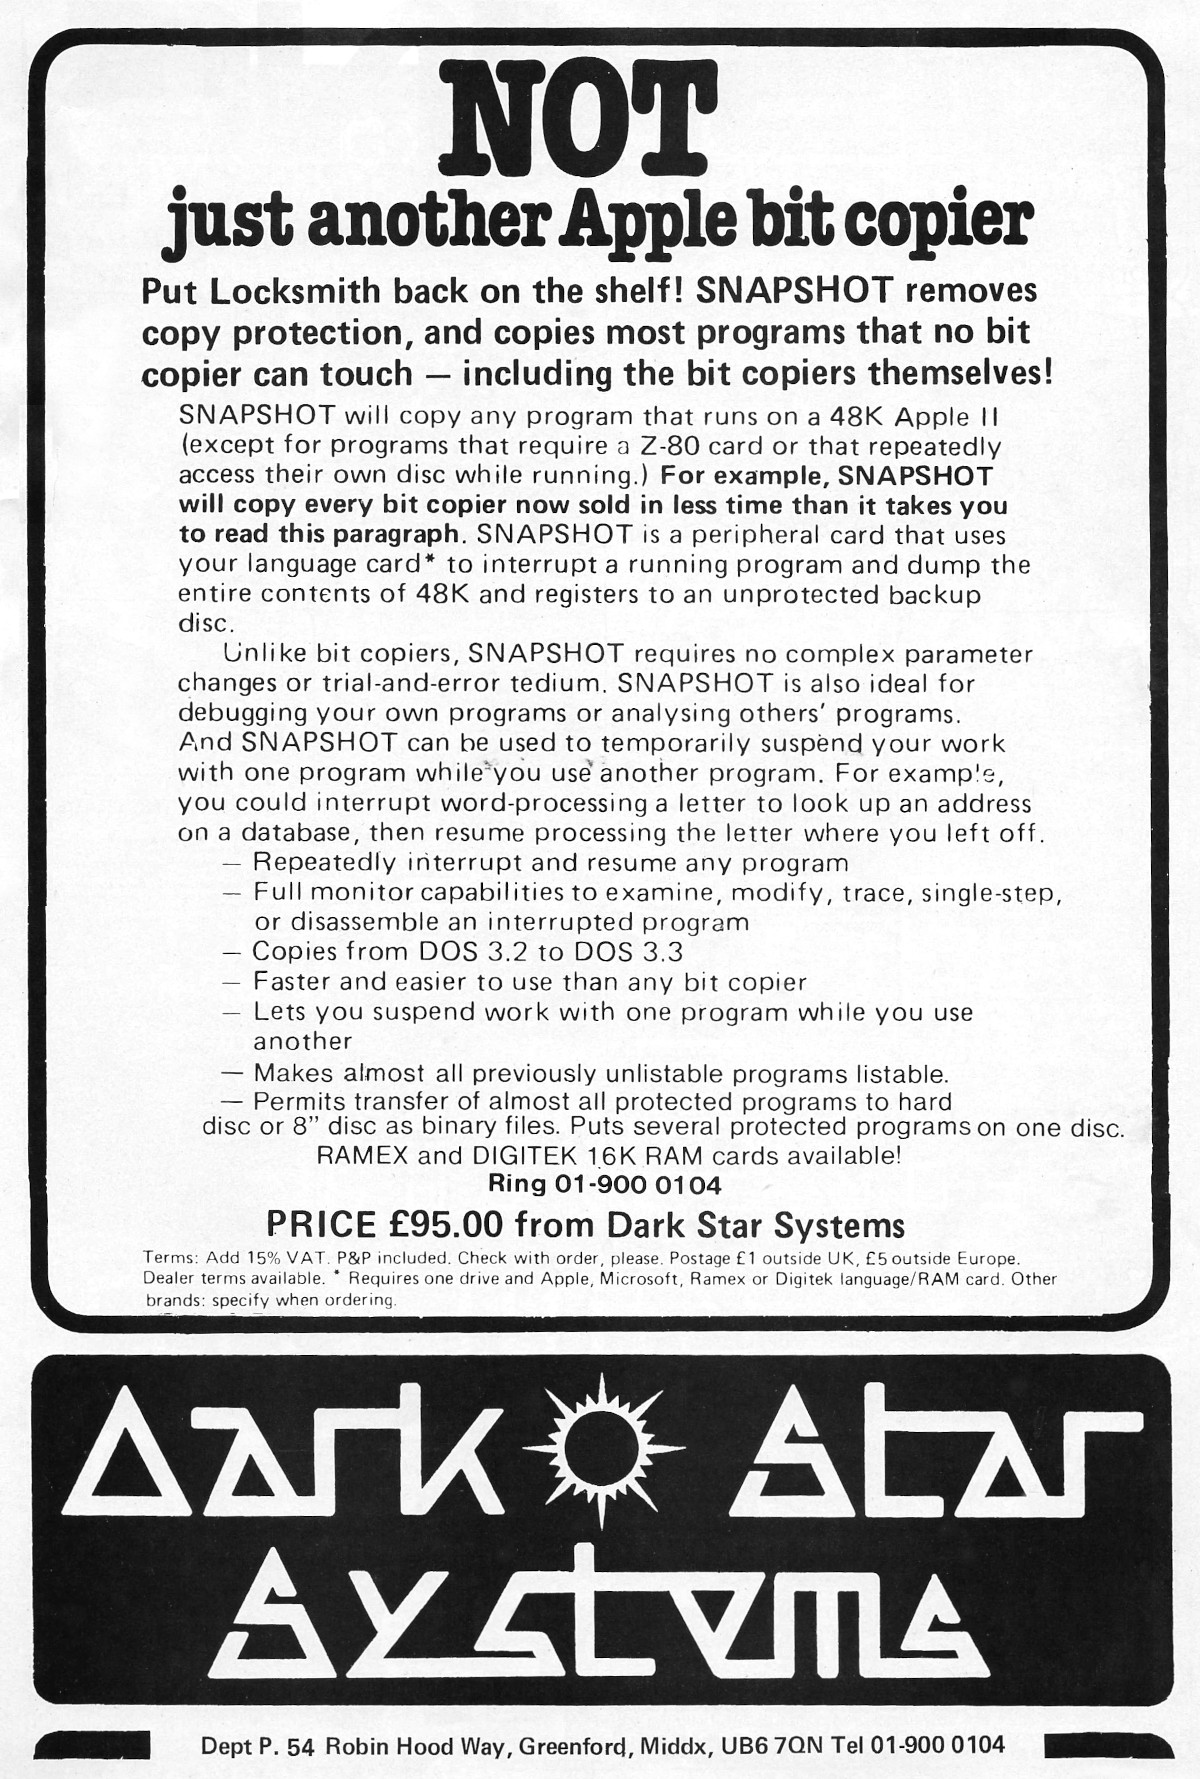 An advert for Dark Star's bit copier - possibly the pinnacle of copiers as it was able to operate at the hardware layer. The 6502 processor in the Apple II that this was aimed add did not implement things like protected memory, so anything that could read memory at the hardware layer had access to everything. From Personal Computer World, December 1982